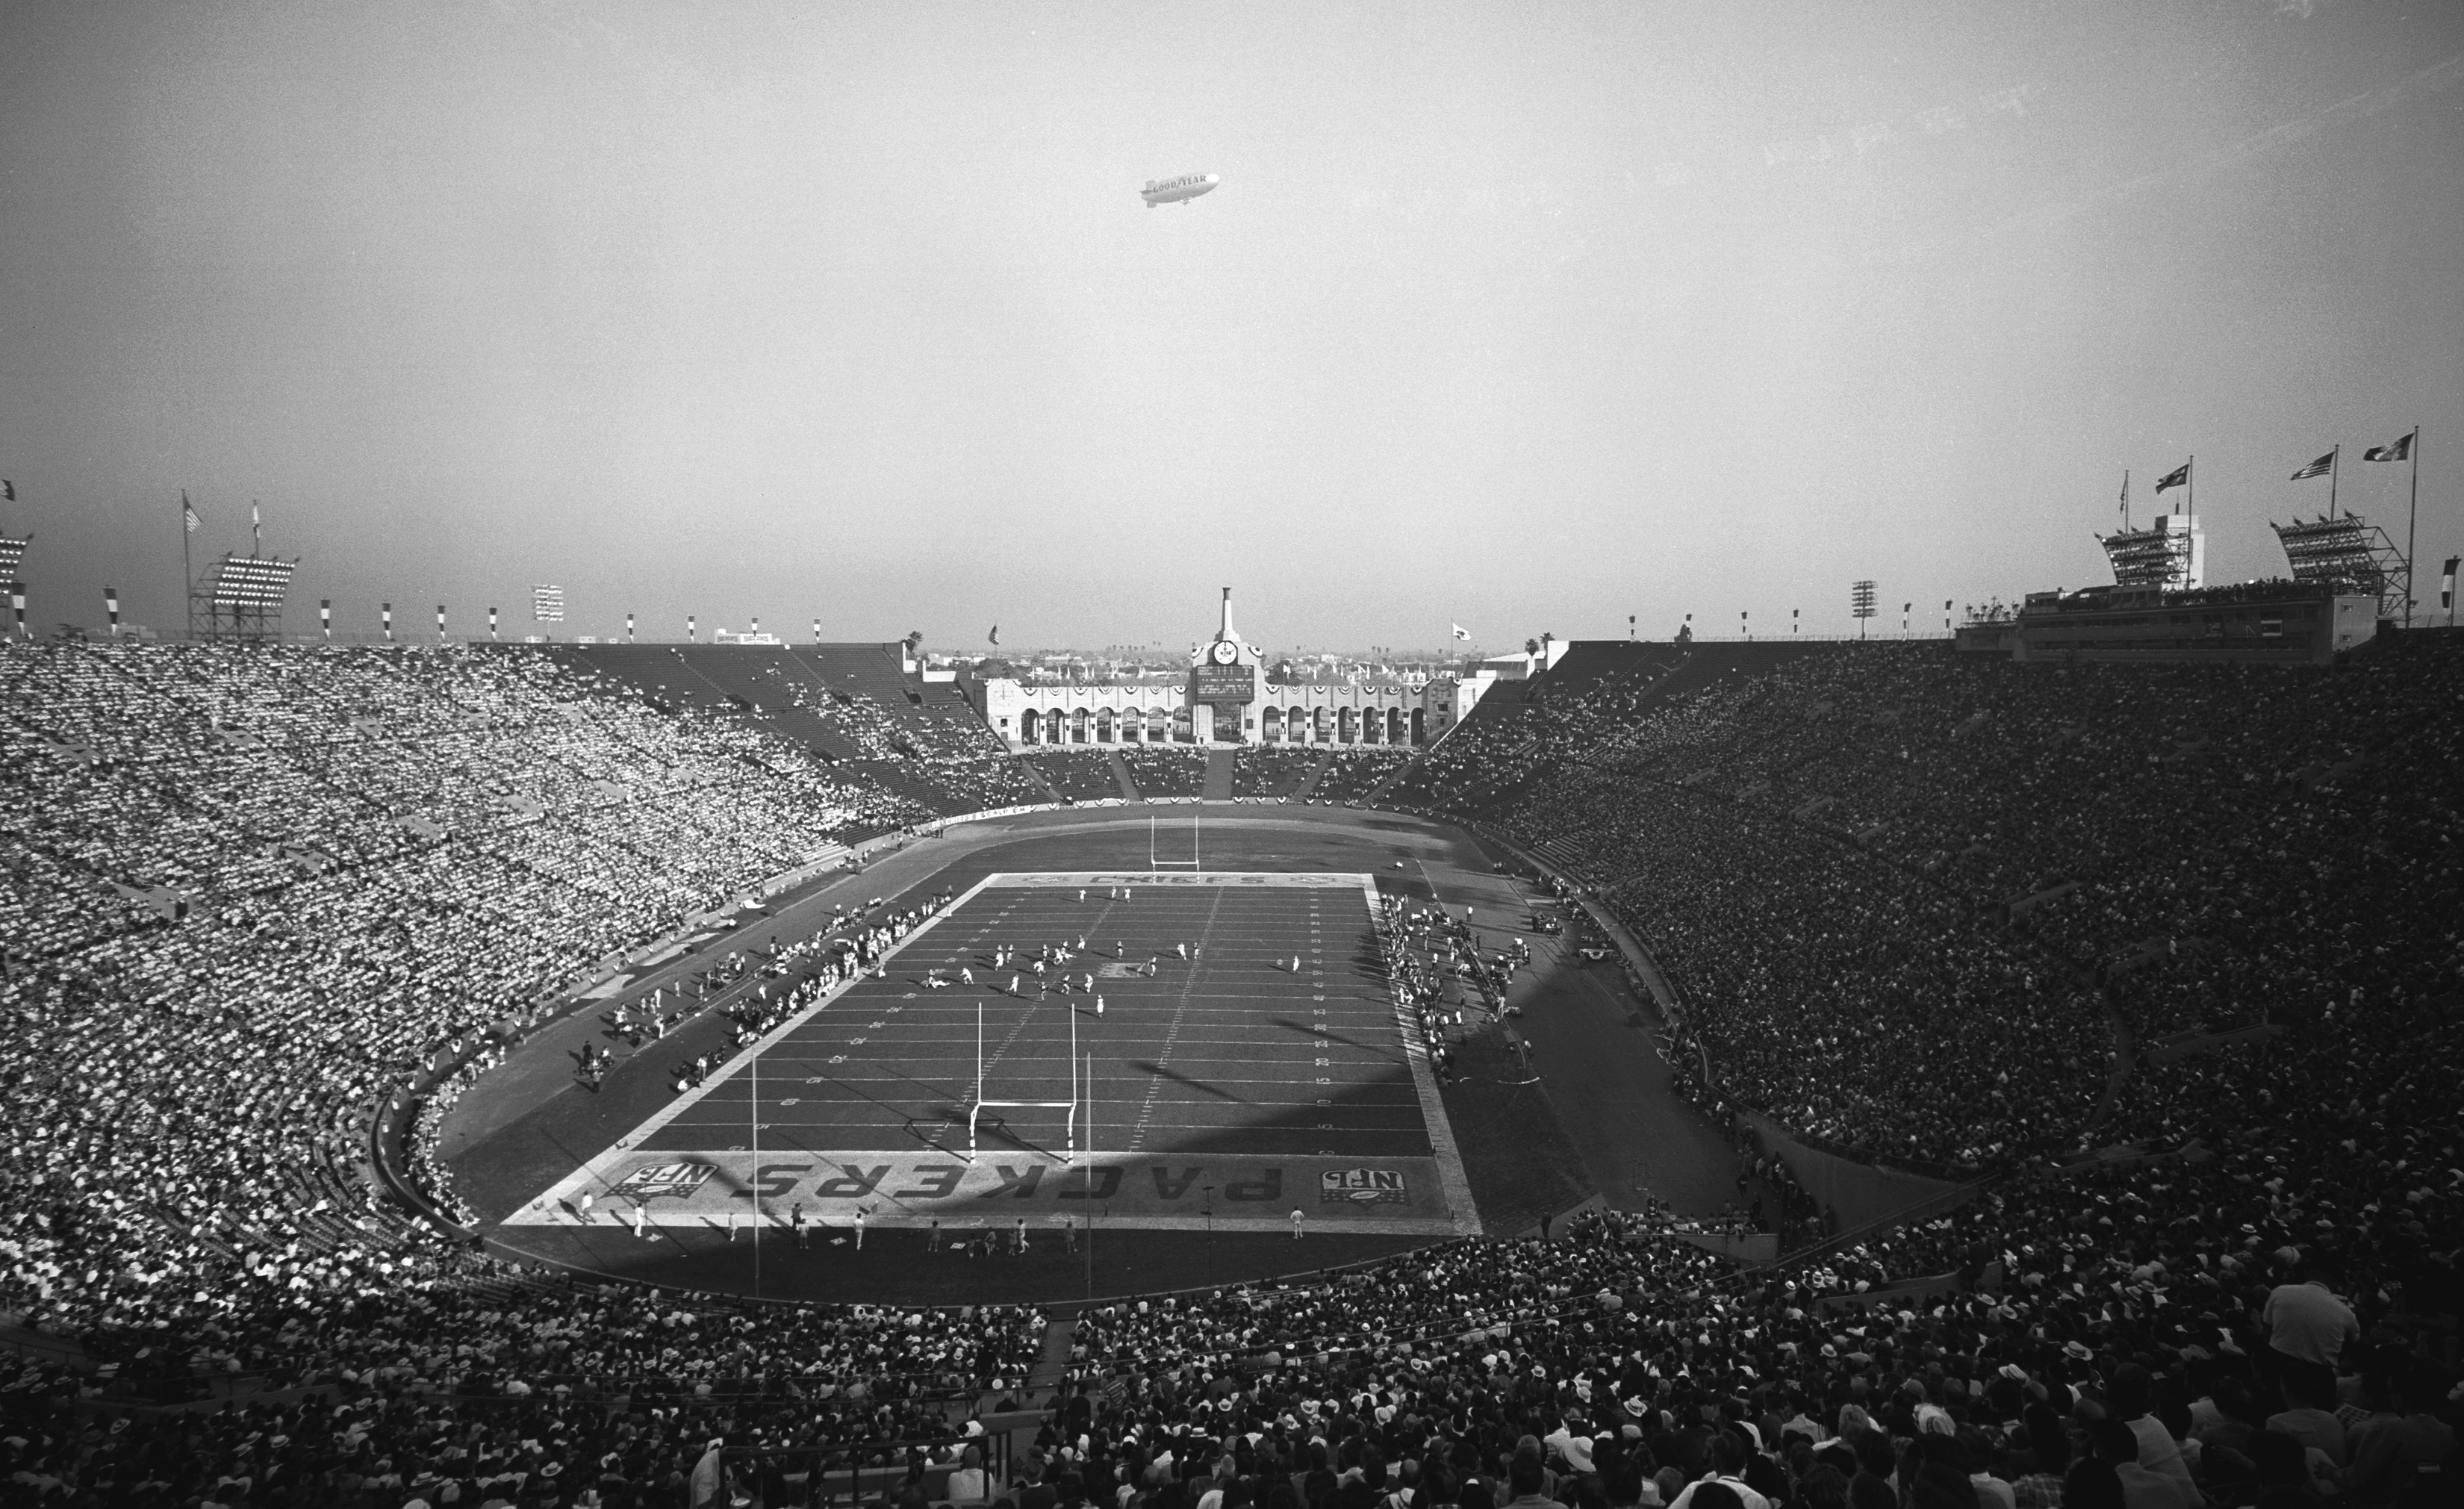 LOS ANGELES - JANUARY 15: The First World Championship Game, AFL vs. NFL, later known as Super Bowl I, on January 15, 1967 at the Los Angeles Memorial Coliseum in Los Angeles, California. (Photo by CBS via Getty Images) (CBS Photo Archive—CBS via Getty Images)